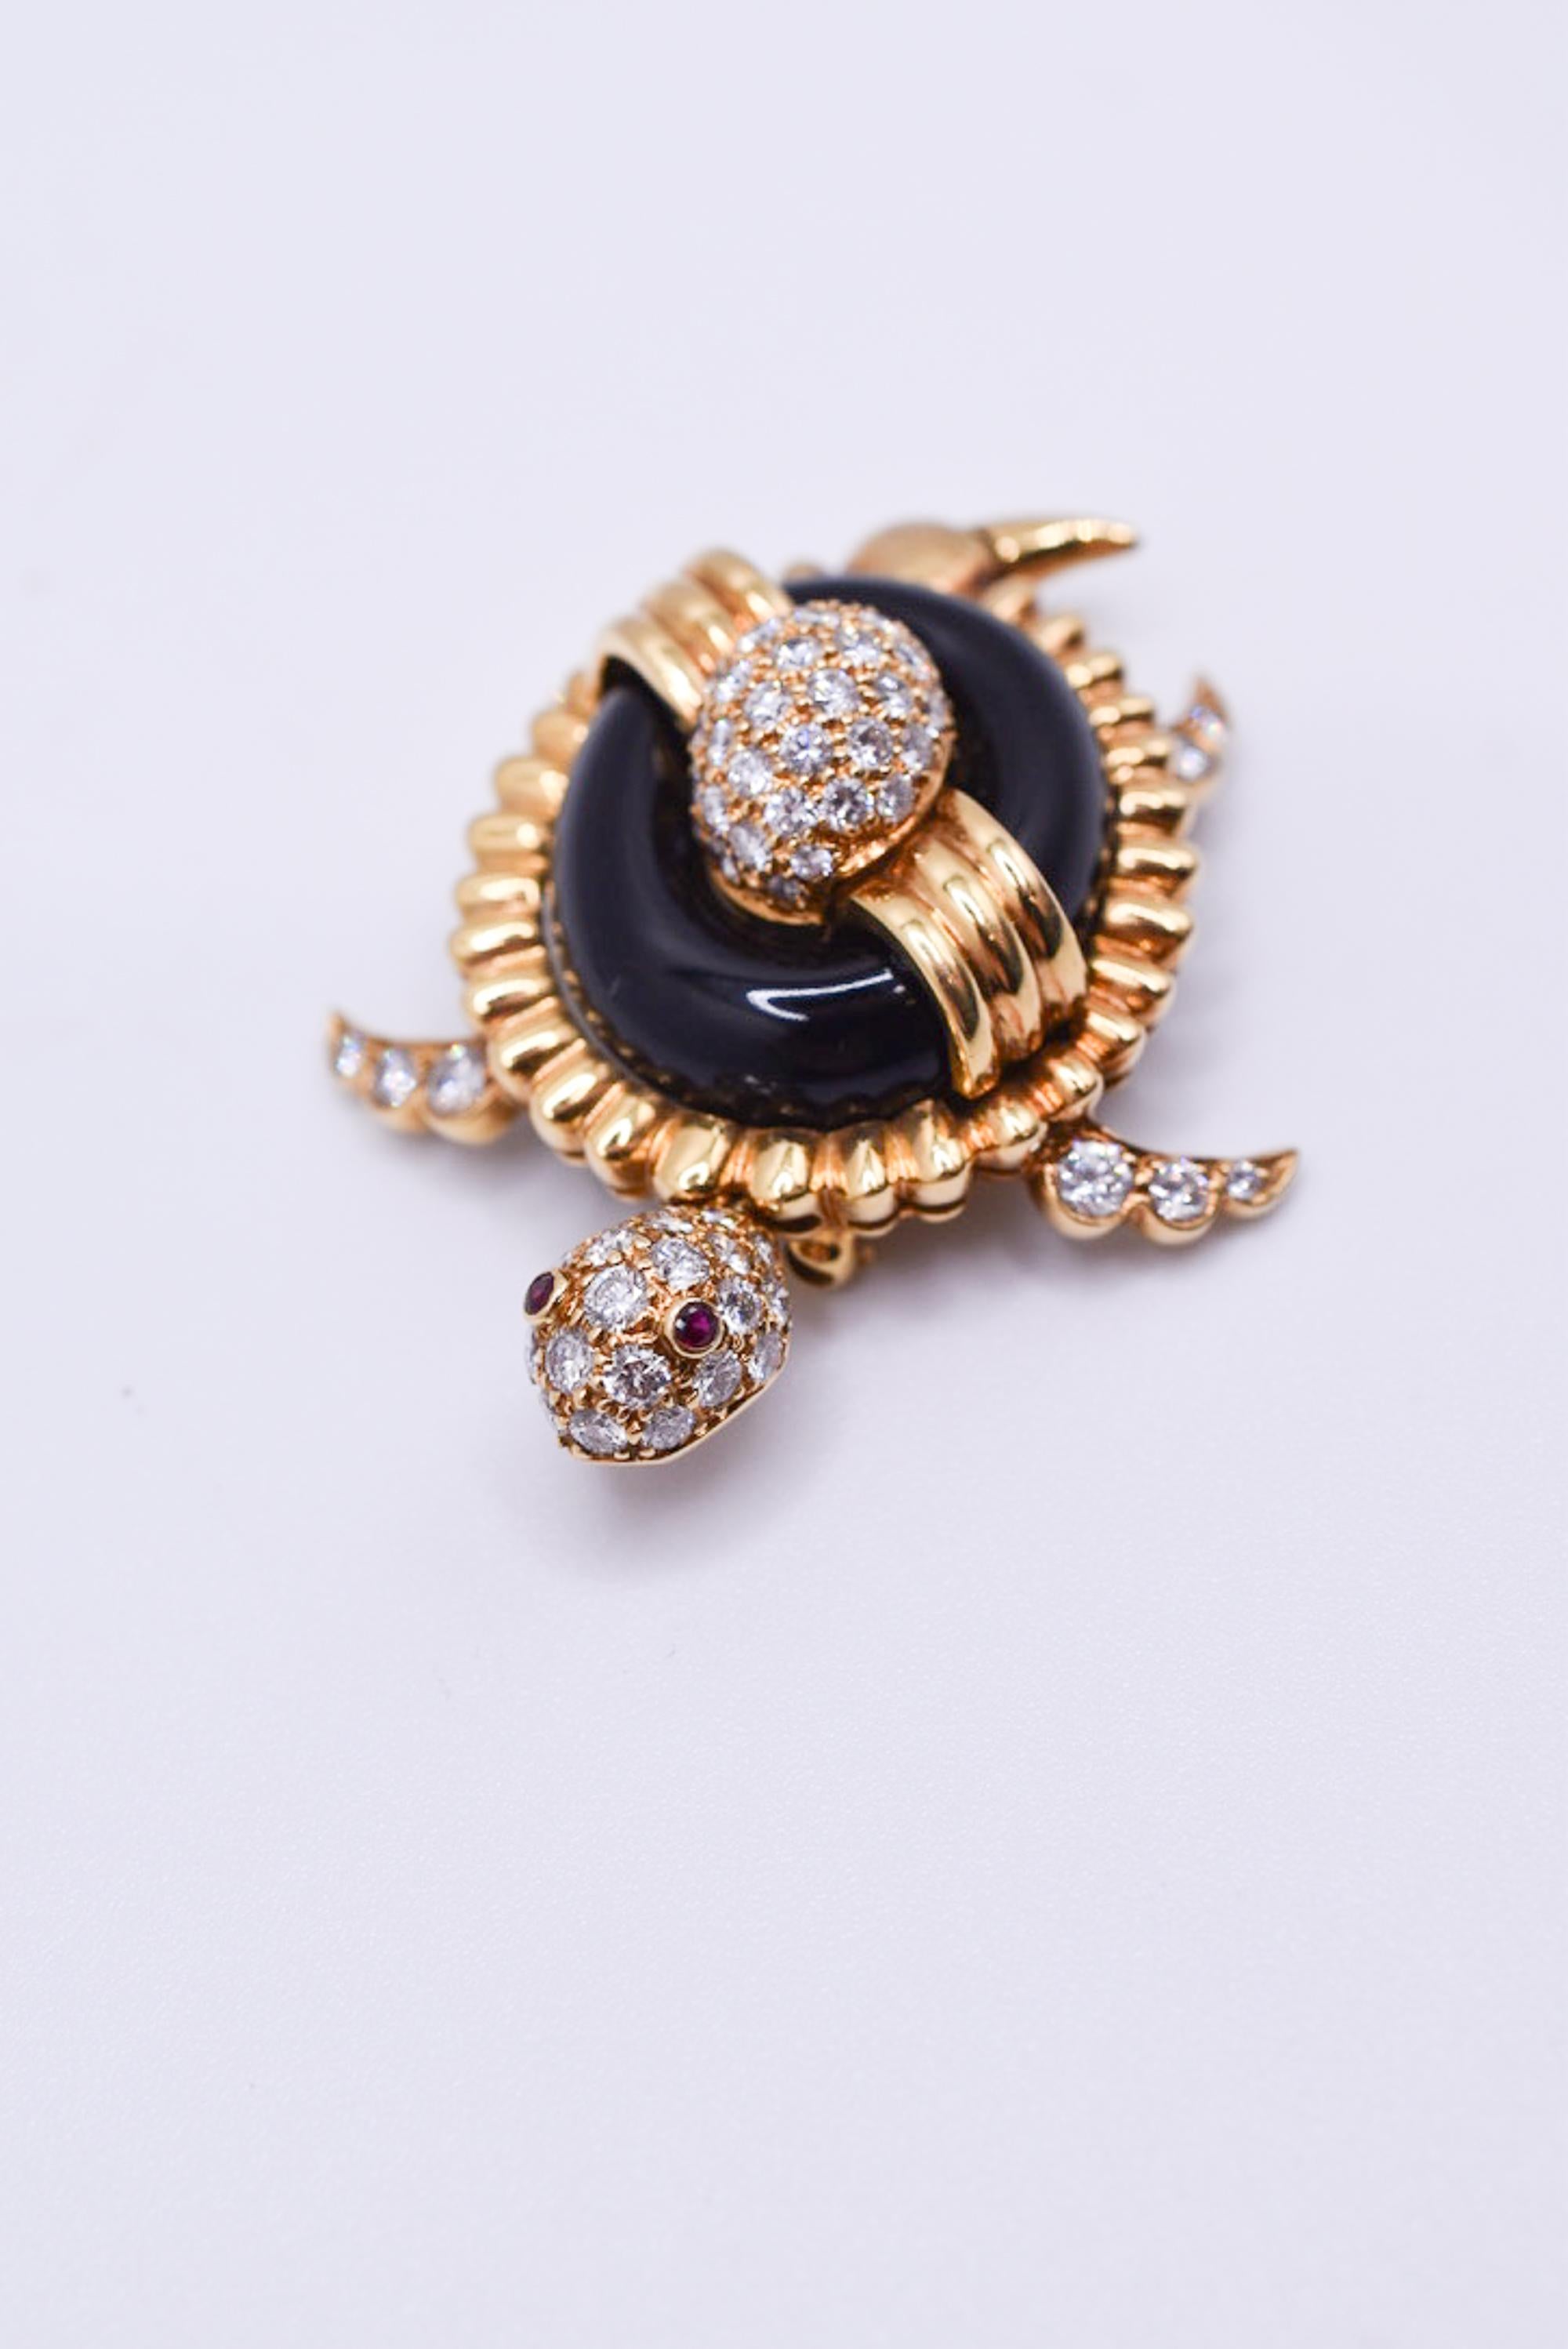 An elegant and sweet Diamond Onyx Gold & Ruby Sea-Turtle Brooch, the shell made of a single piece of polished black onyx mounted in 18k yellow gold and further embellished with pavé-set diamonds and ruby eyes.
Made in the USA, circa 1970.

Gross